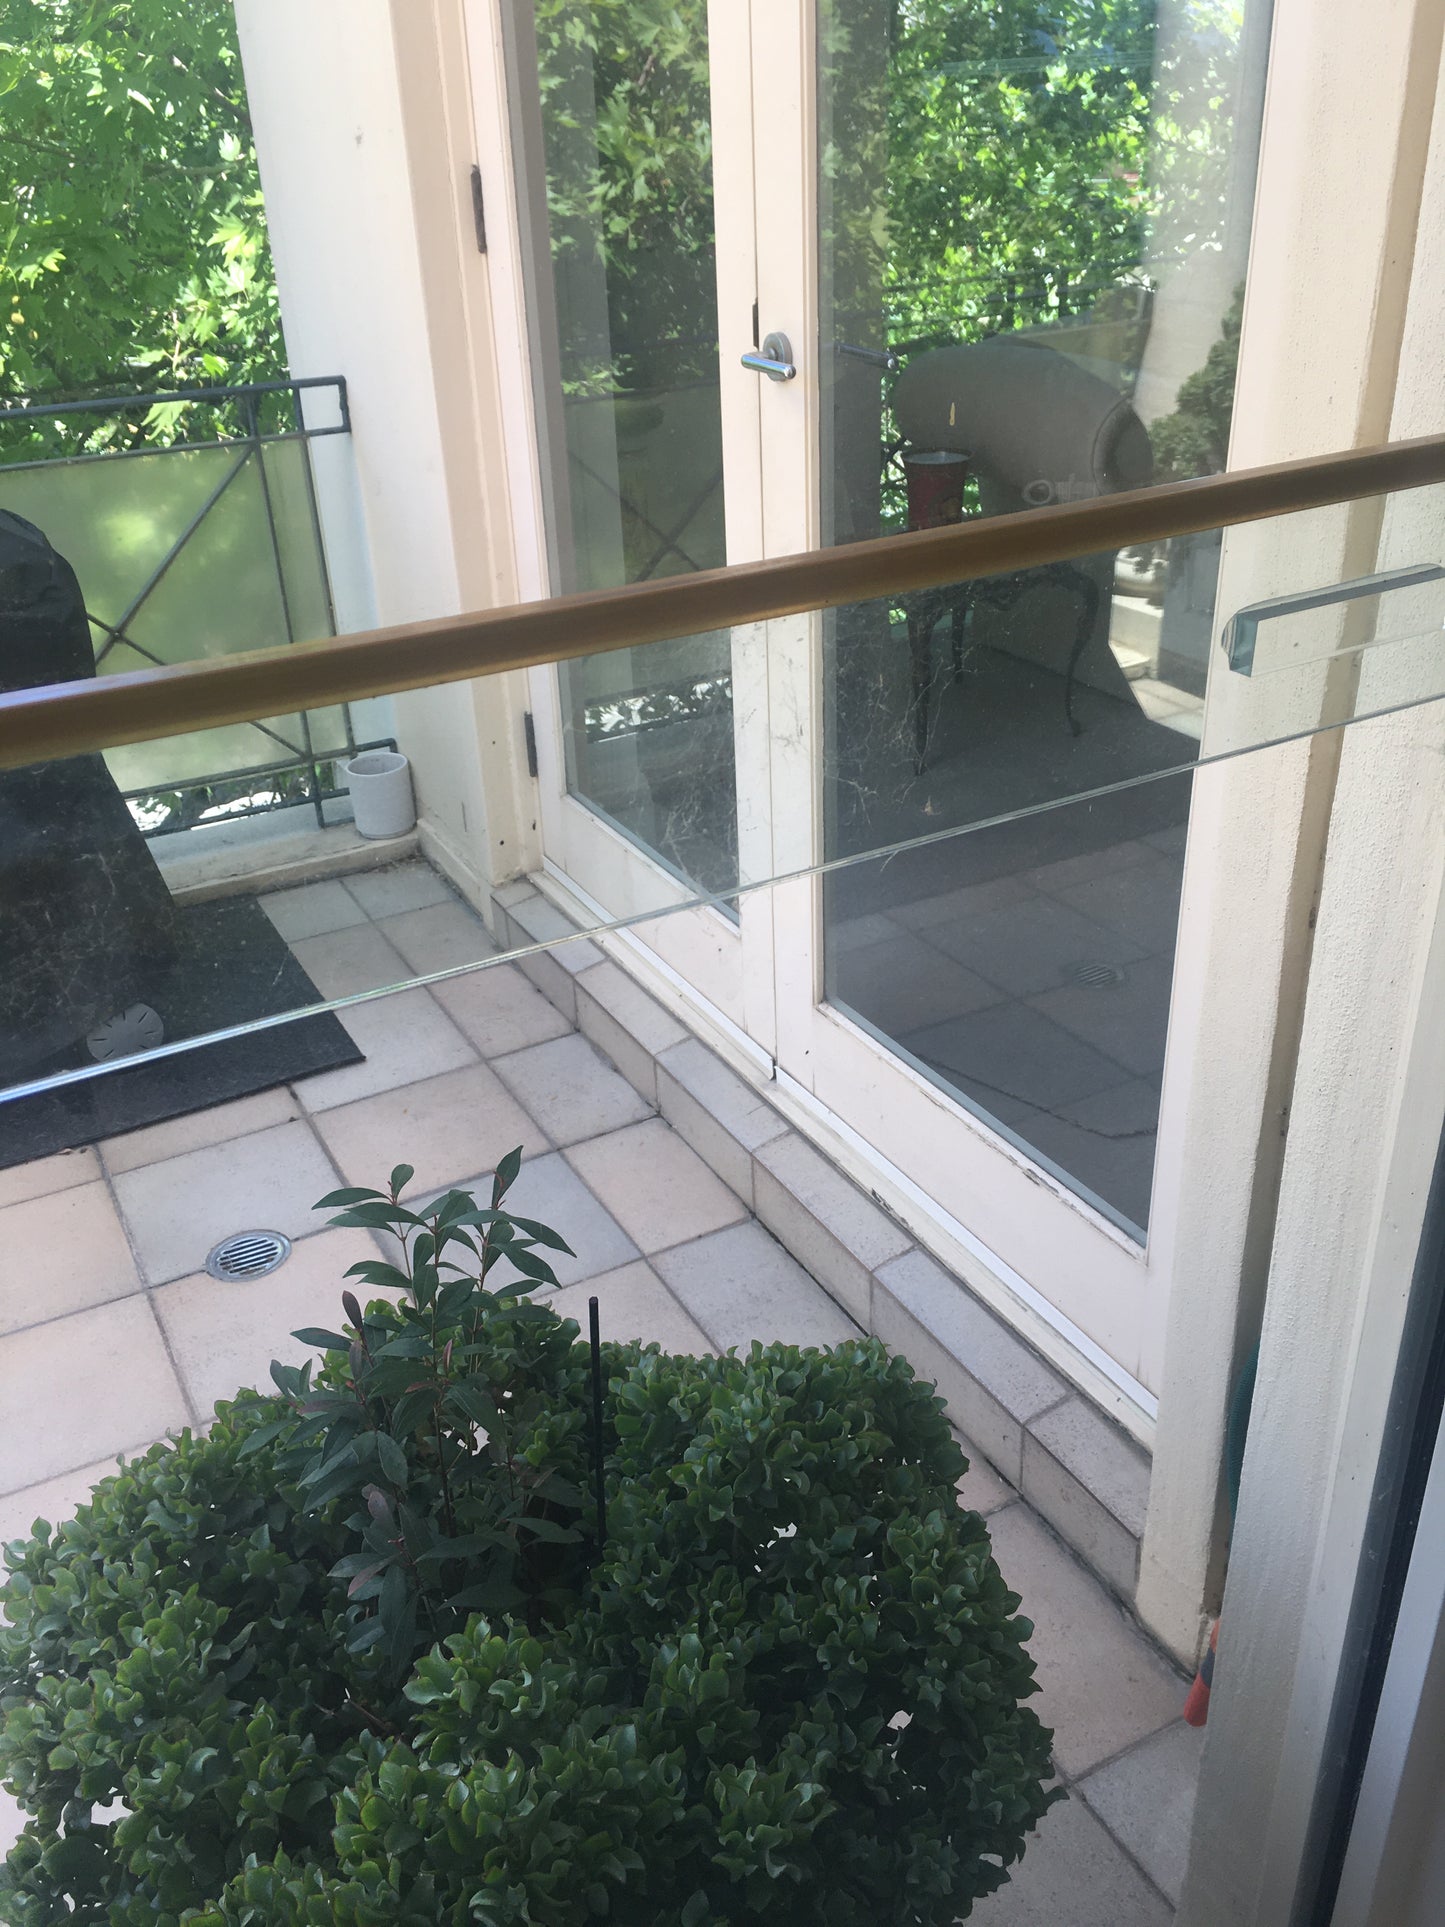 Lapseal Clear Acrylic 6mm For Sashless Windows-1100 Length